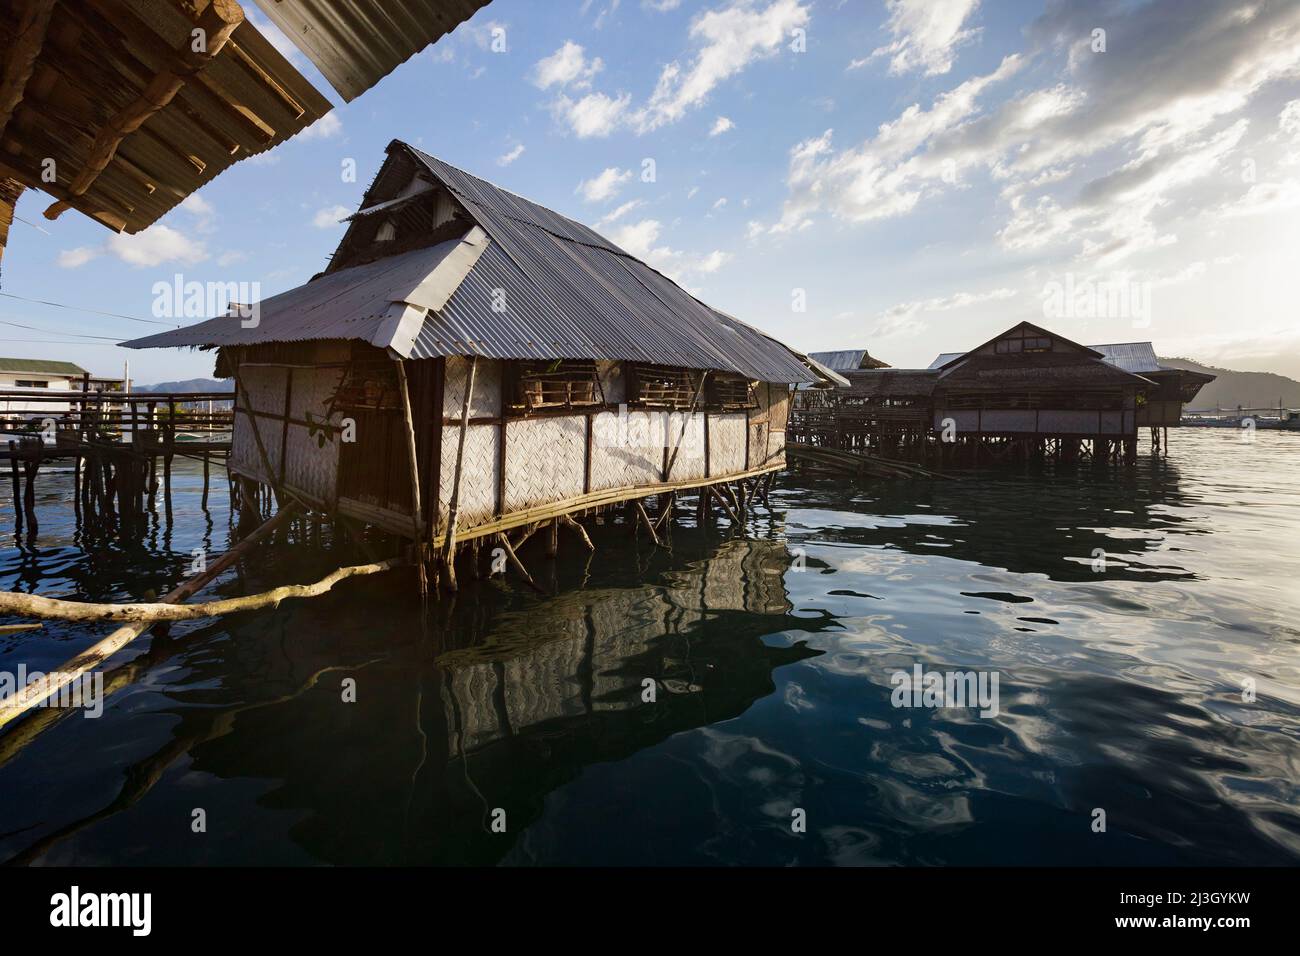 Philippines, Palawan, Calamianes archipelago, Coron Town, Krystal Lodge charming hotel, on stilts and made of natural materials, view from the terrace Stock Photo